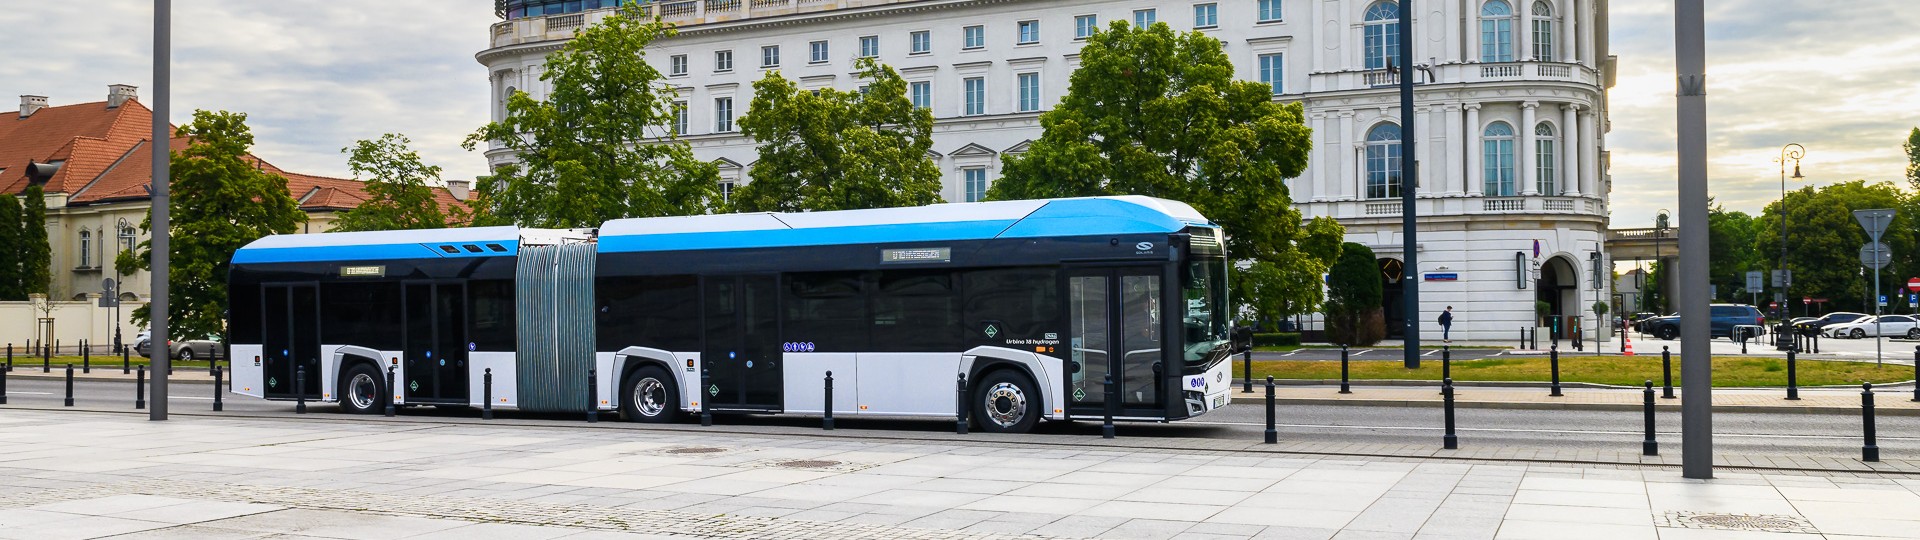 Coming soon: ONLINE LAUNCH of the Urbino 18 hydrogen bus and #SolarisTalks 2022